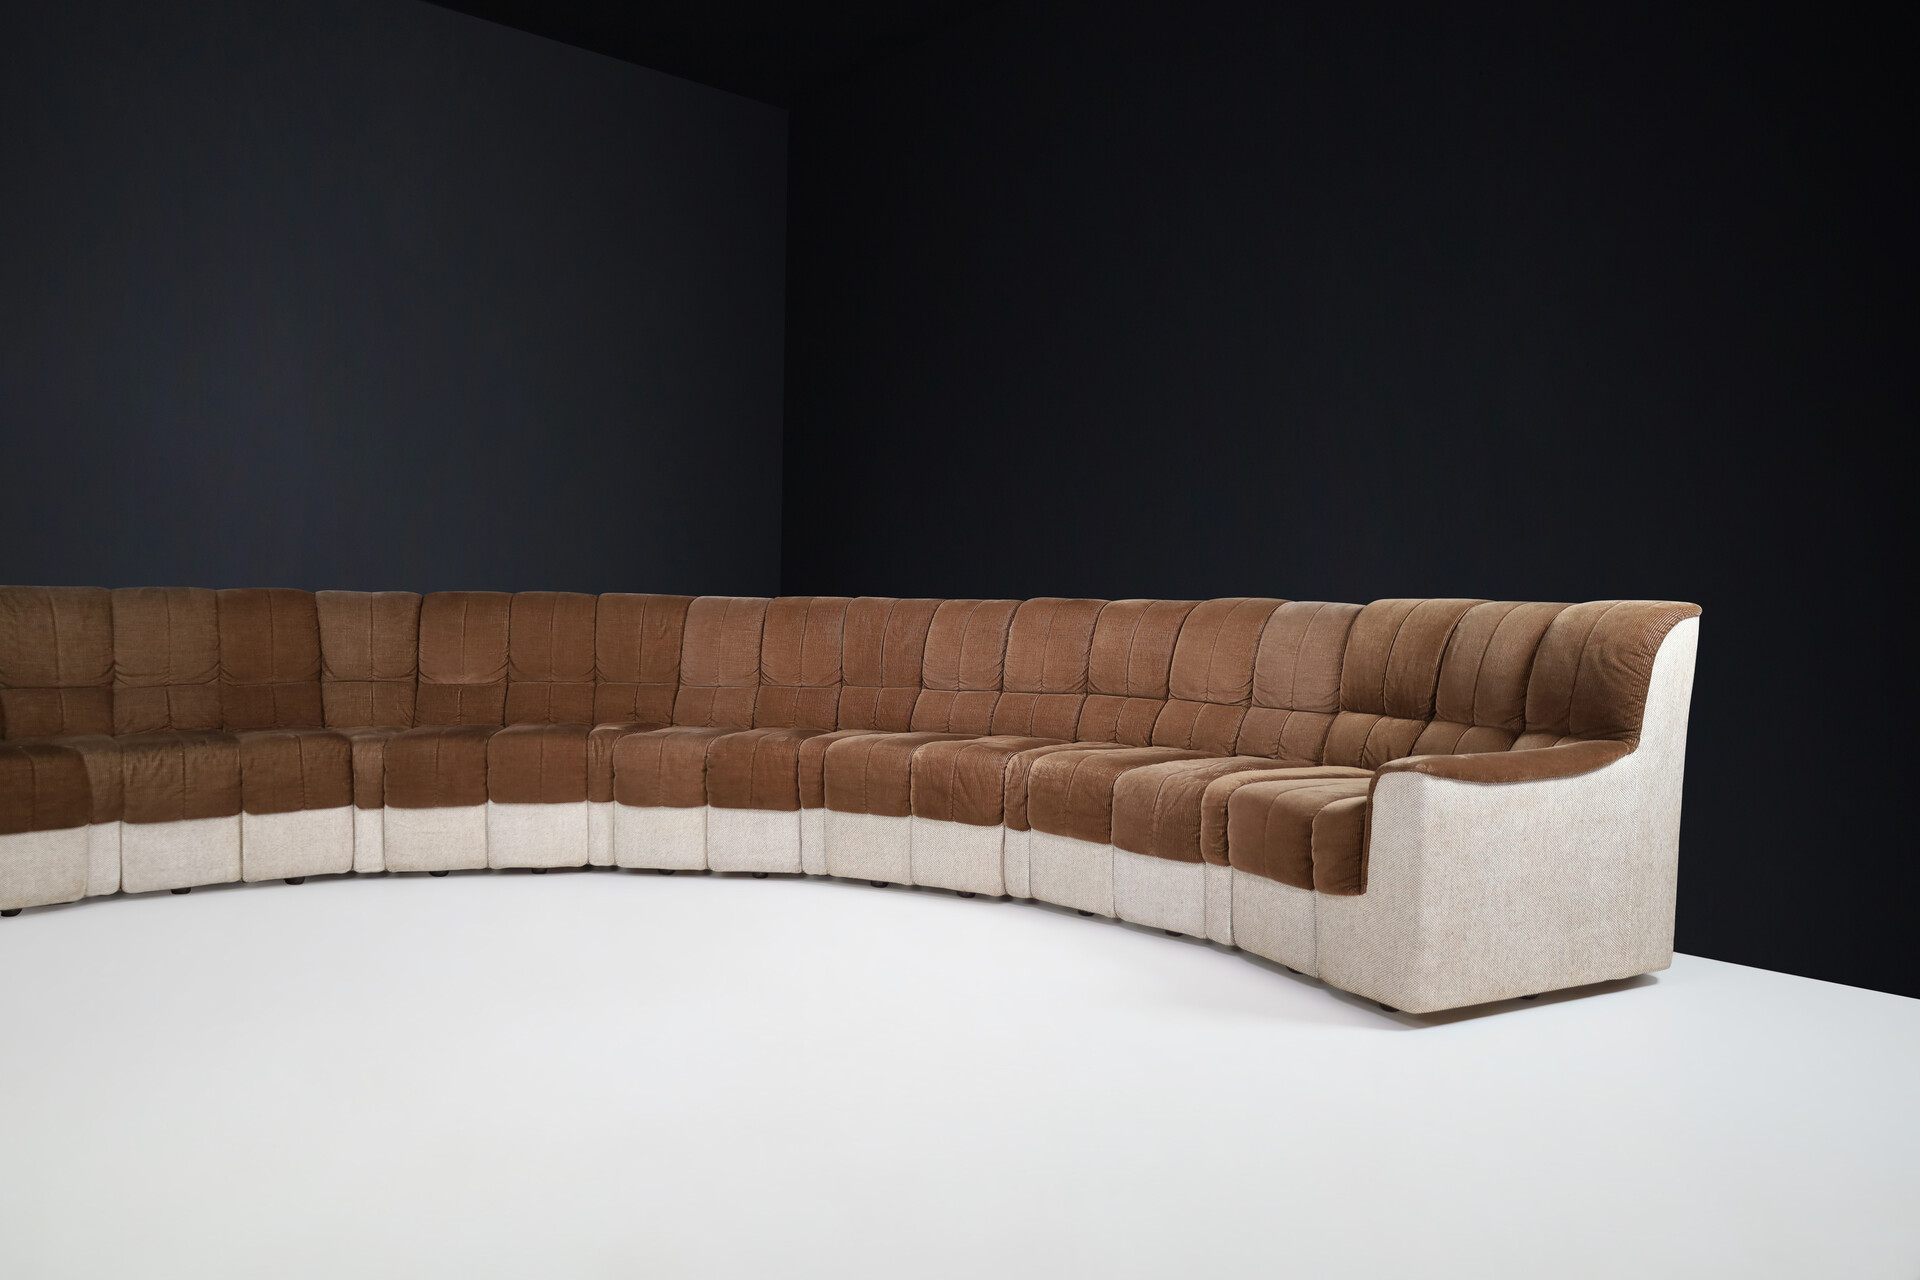 Mid century modern Cord fabric sofa in the style of De Sede DS-600 'Snake' Sectional , Germany 1970s Late-20th century